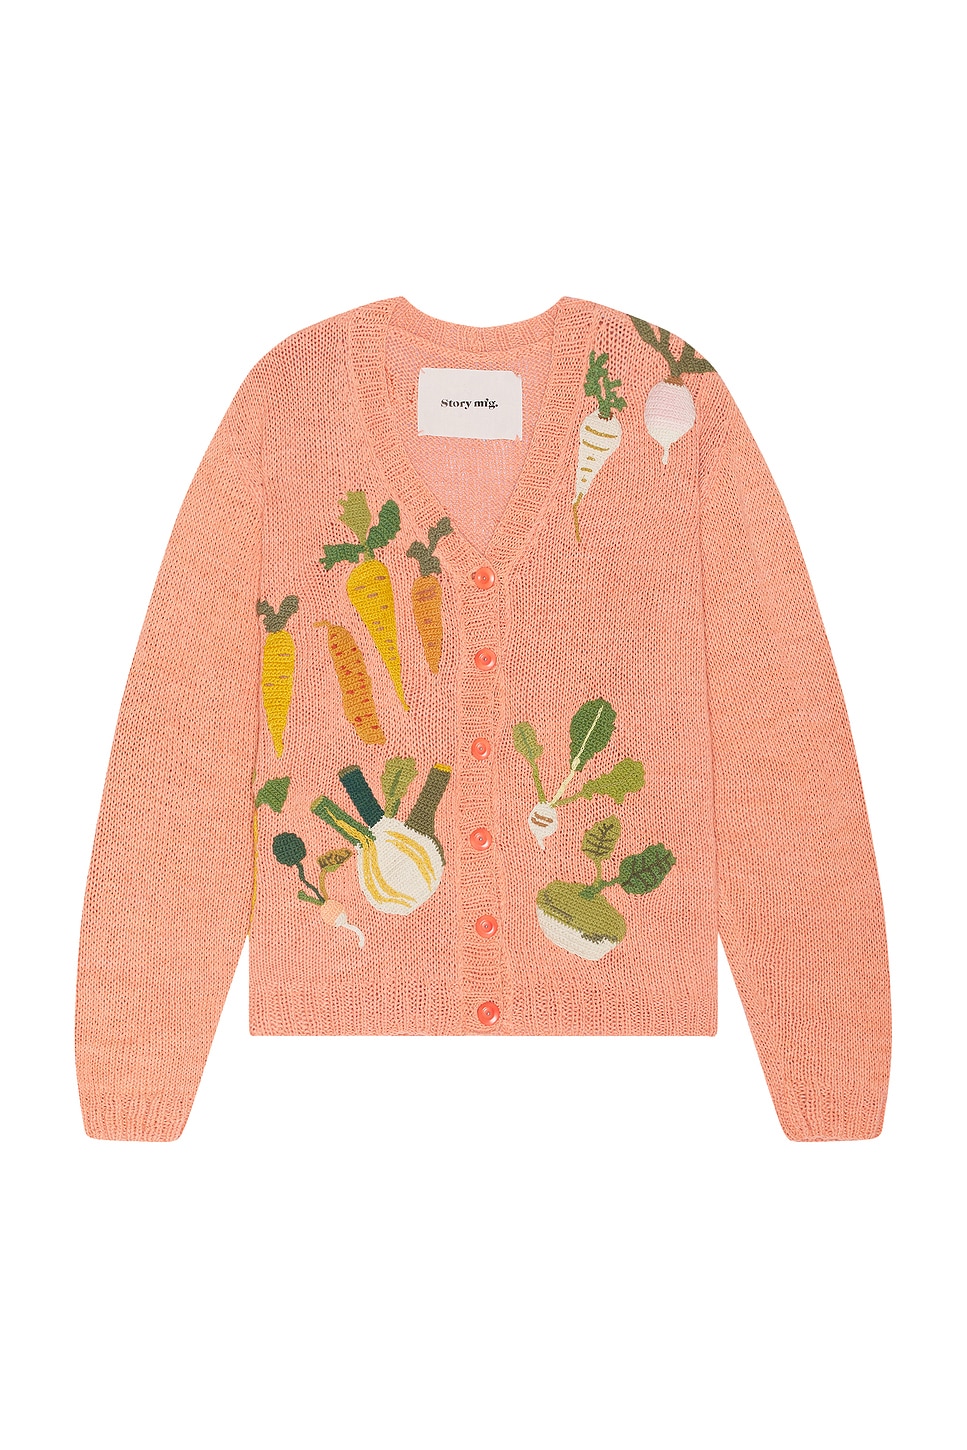 Image 1 of Story mfg. Twinsun Cardigan in Pink Rooting For You